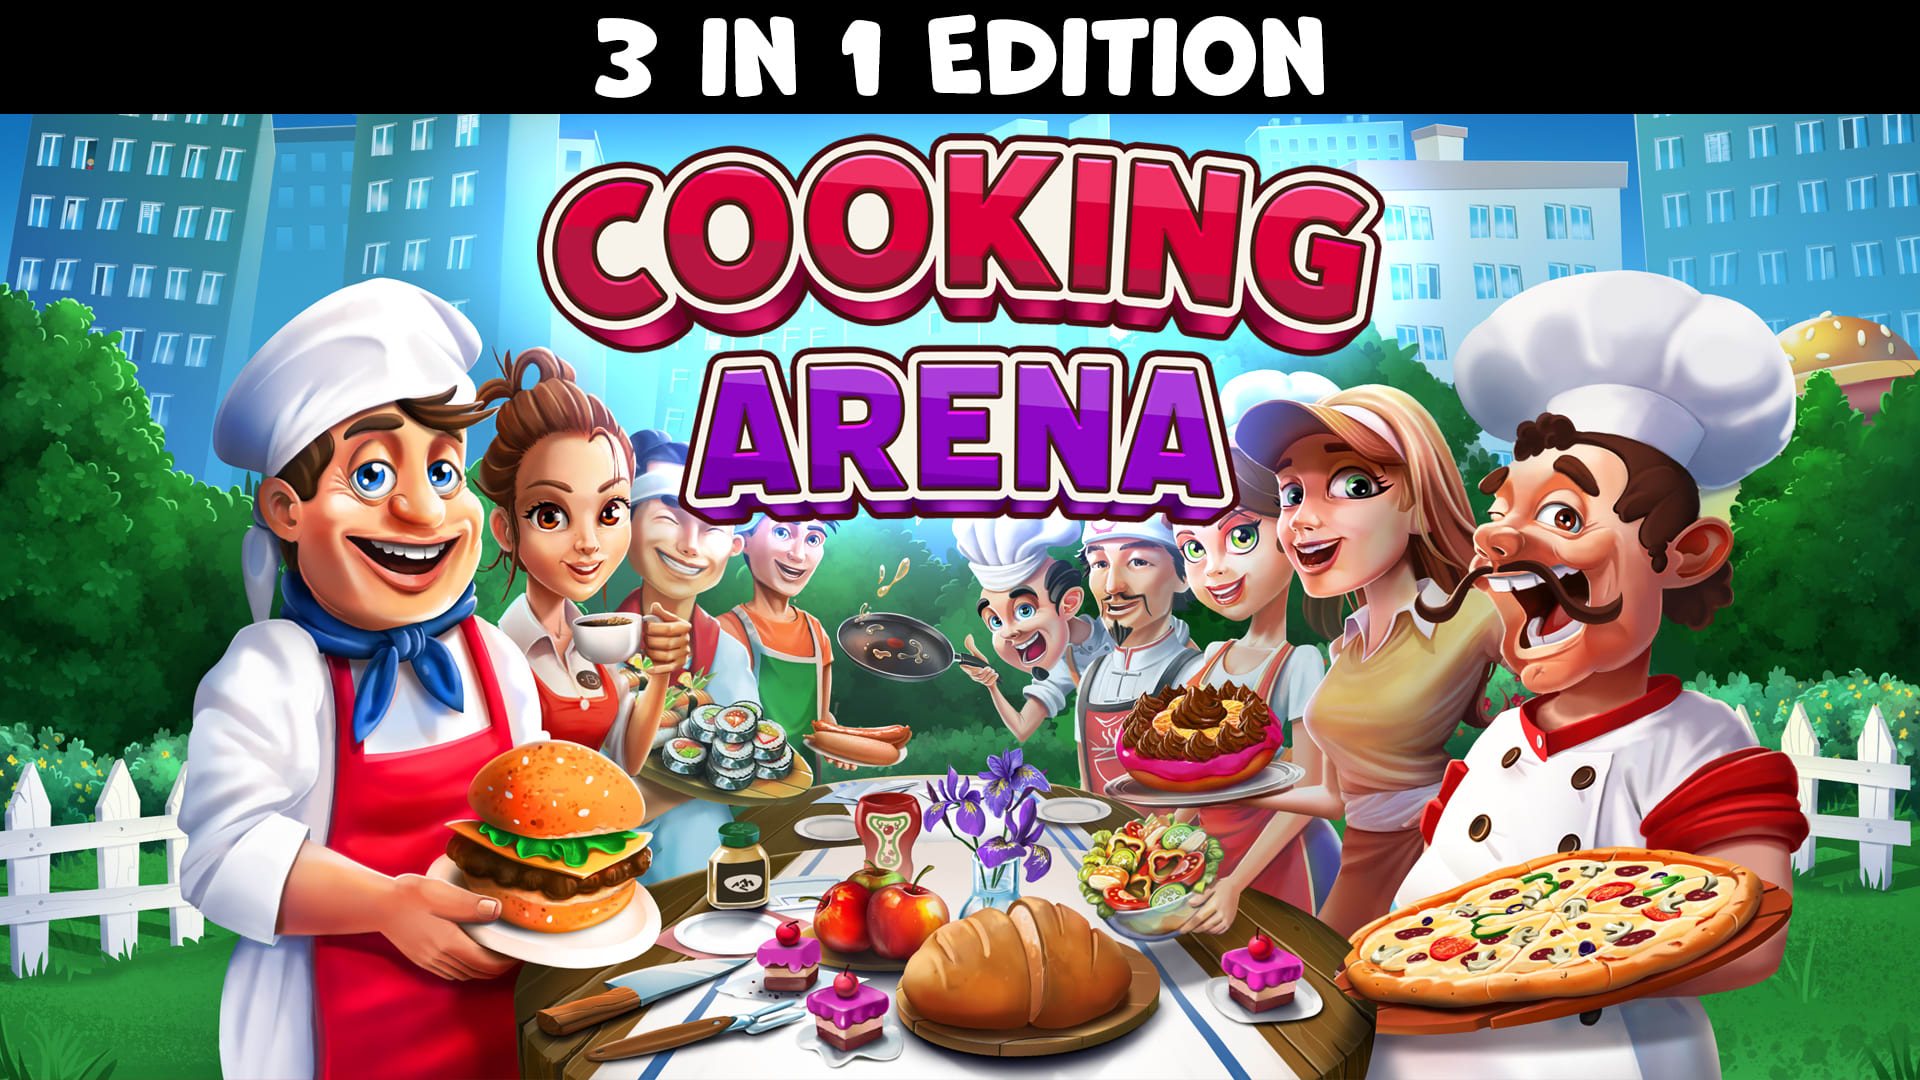 Cooking Arena - 3 in 1 Edition 1